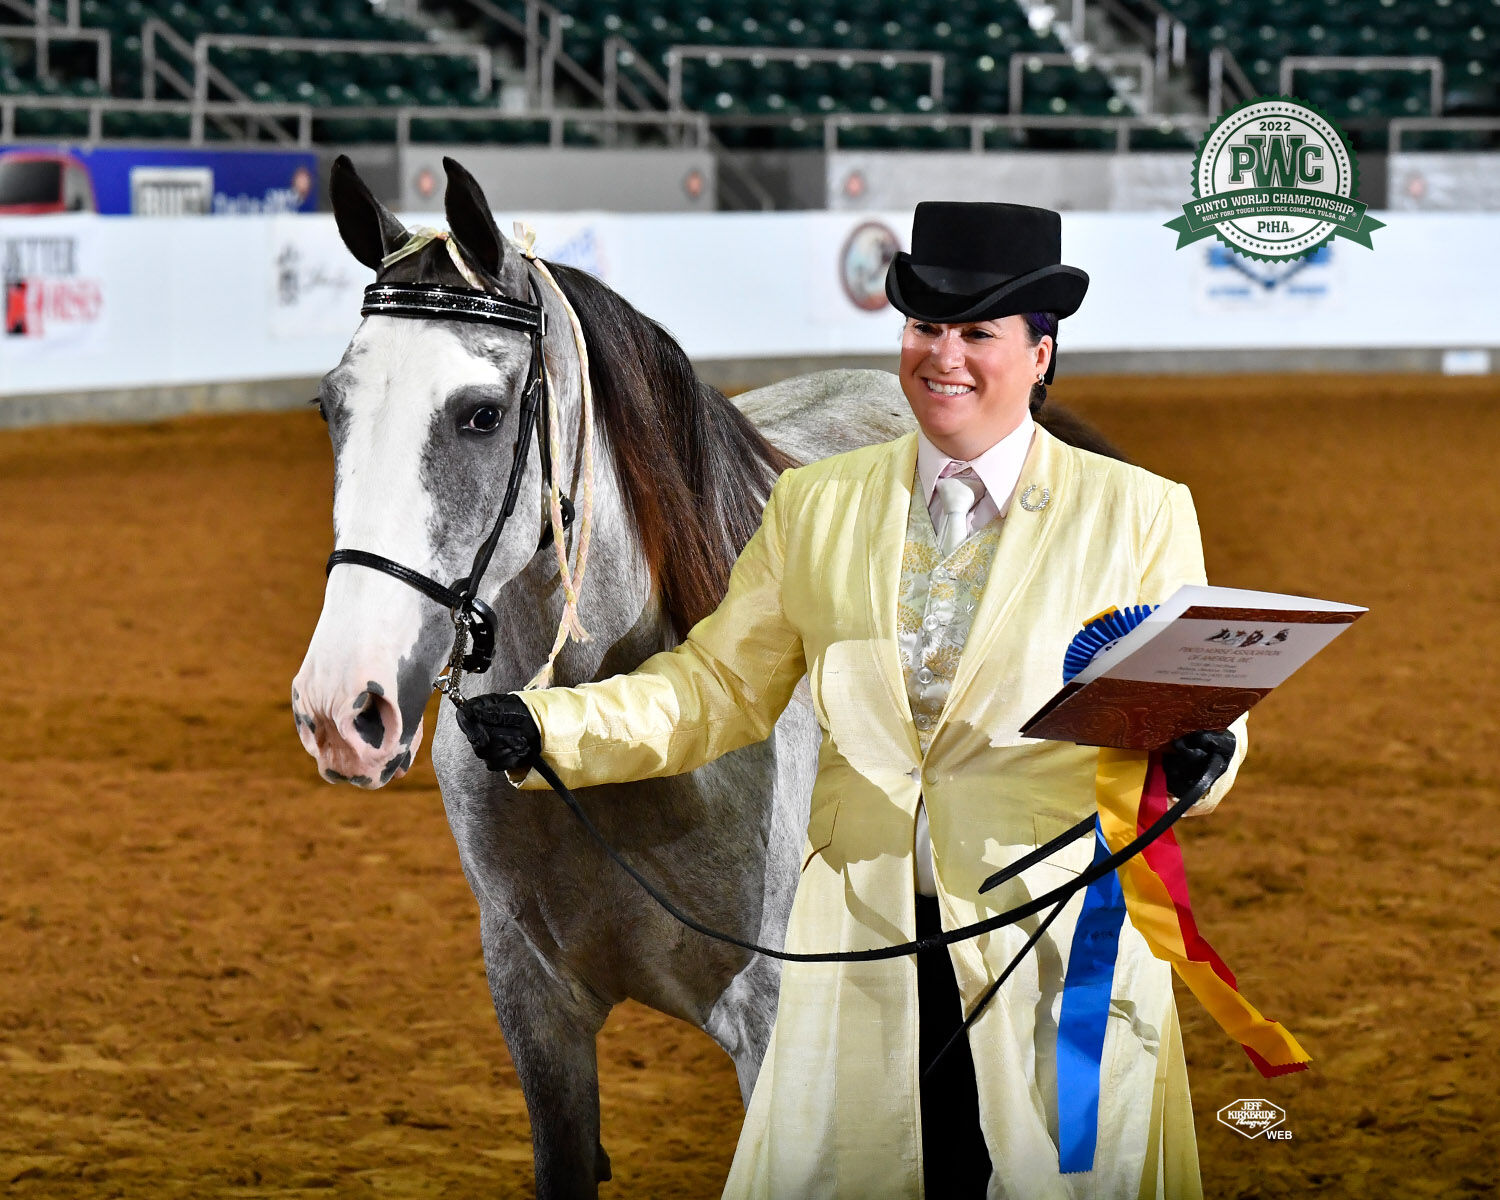 Bristol woman is five-time equestrian champ pic